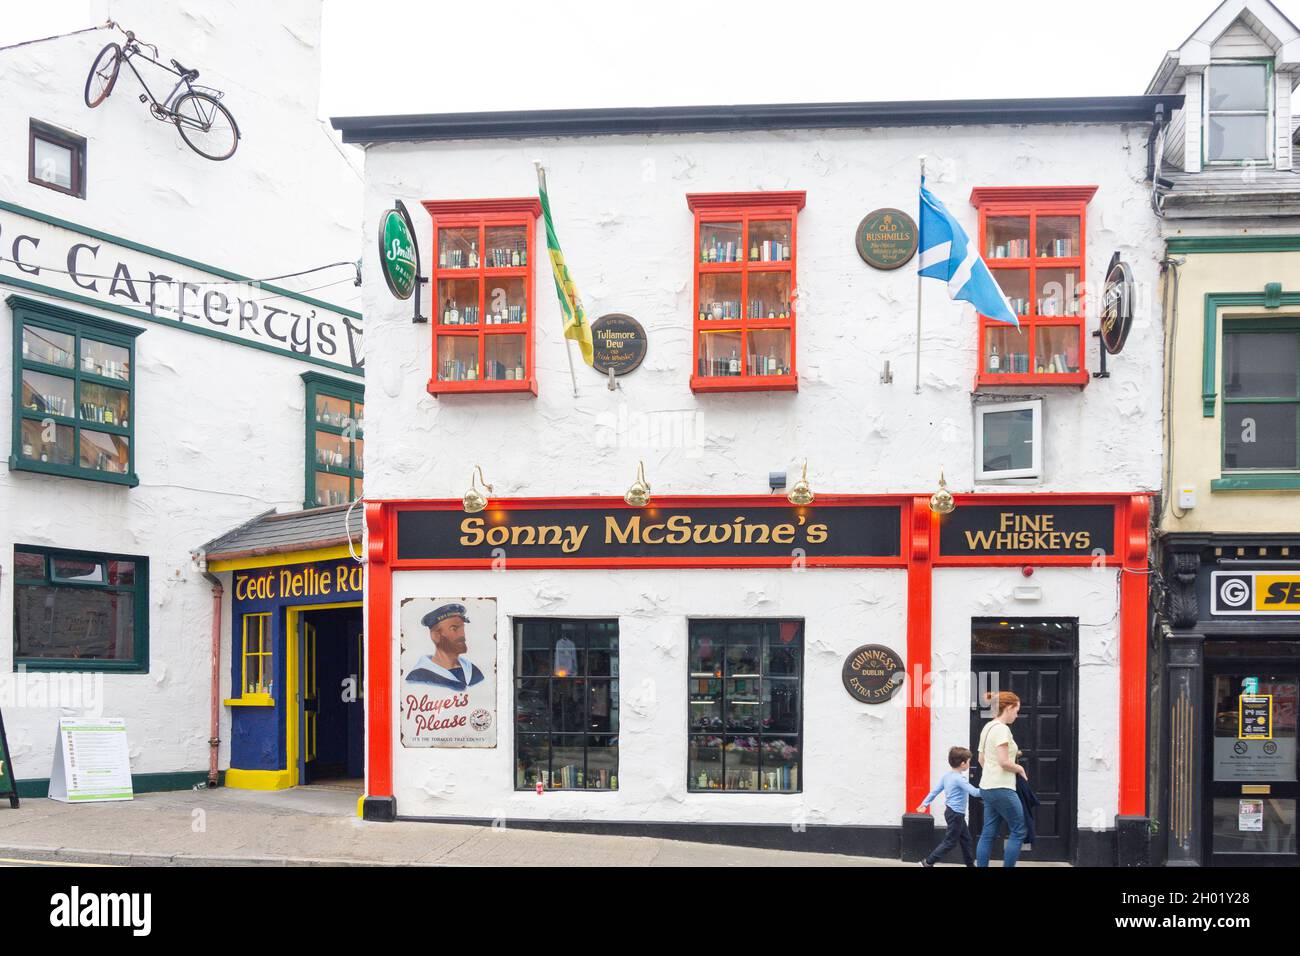 McCafferty's and Sonny McSwine's Pubs, Quay Street, Donegal (Dun na nGall), County Donegal, Republic of Ireland Stock Photo